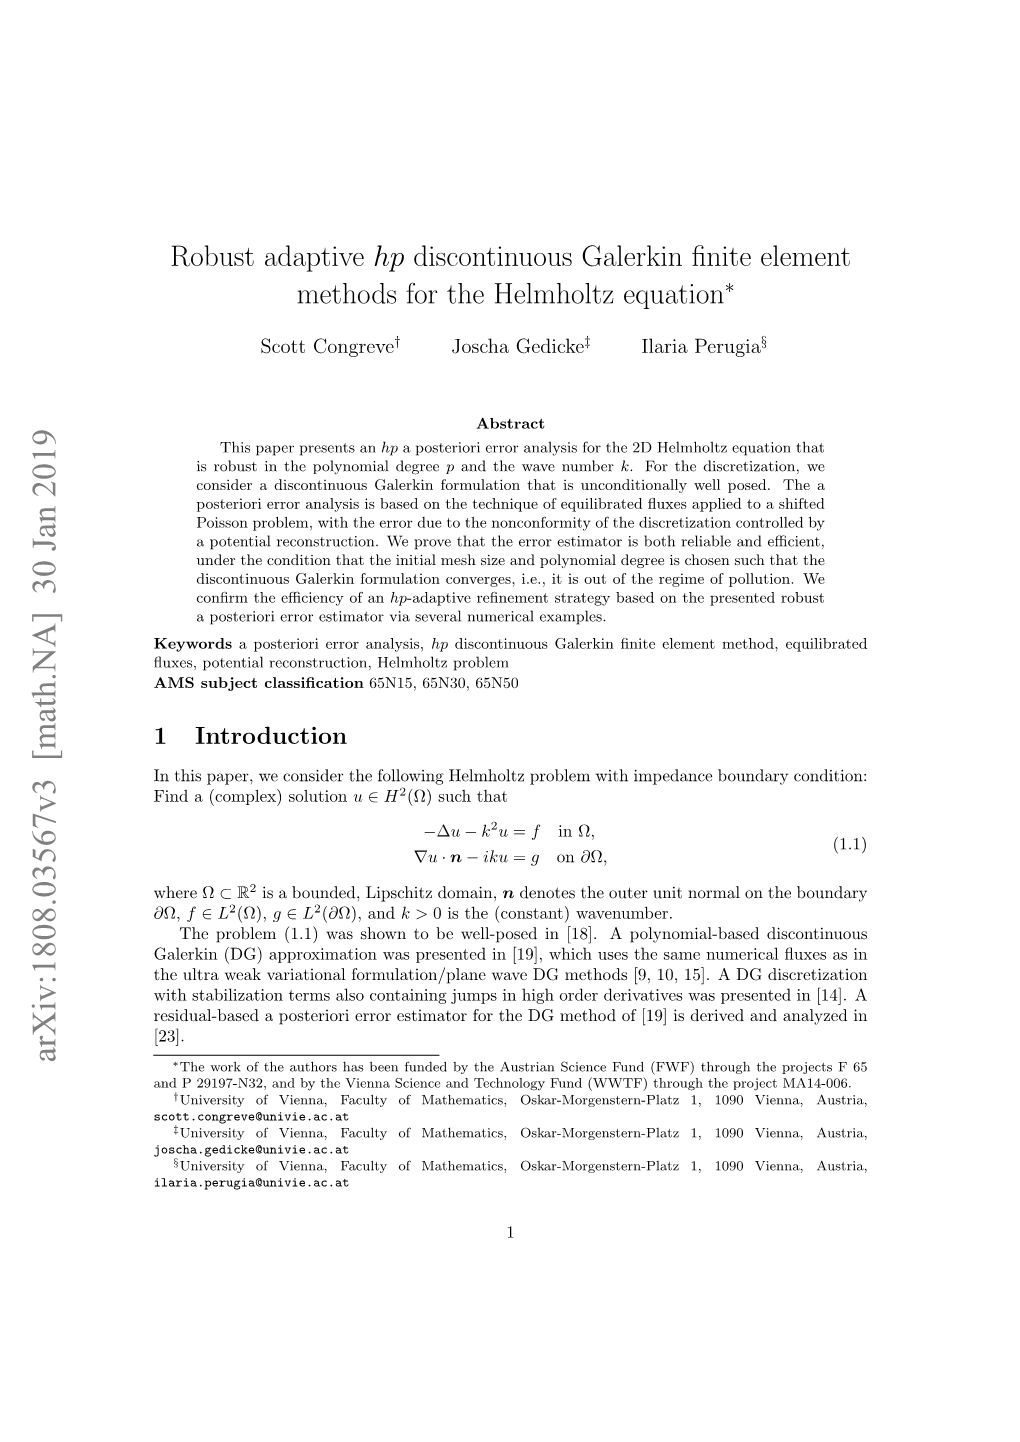 Robust Adaptive Hp Discontinuous Galerkin Finite Element Methods For